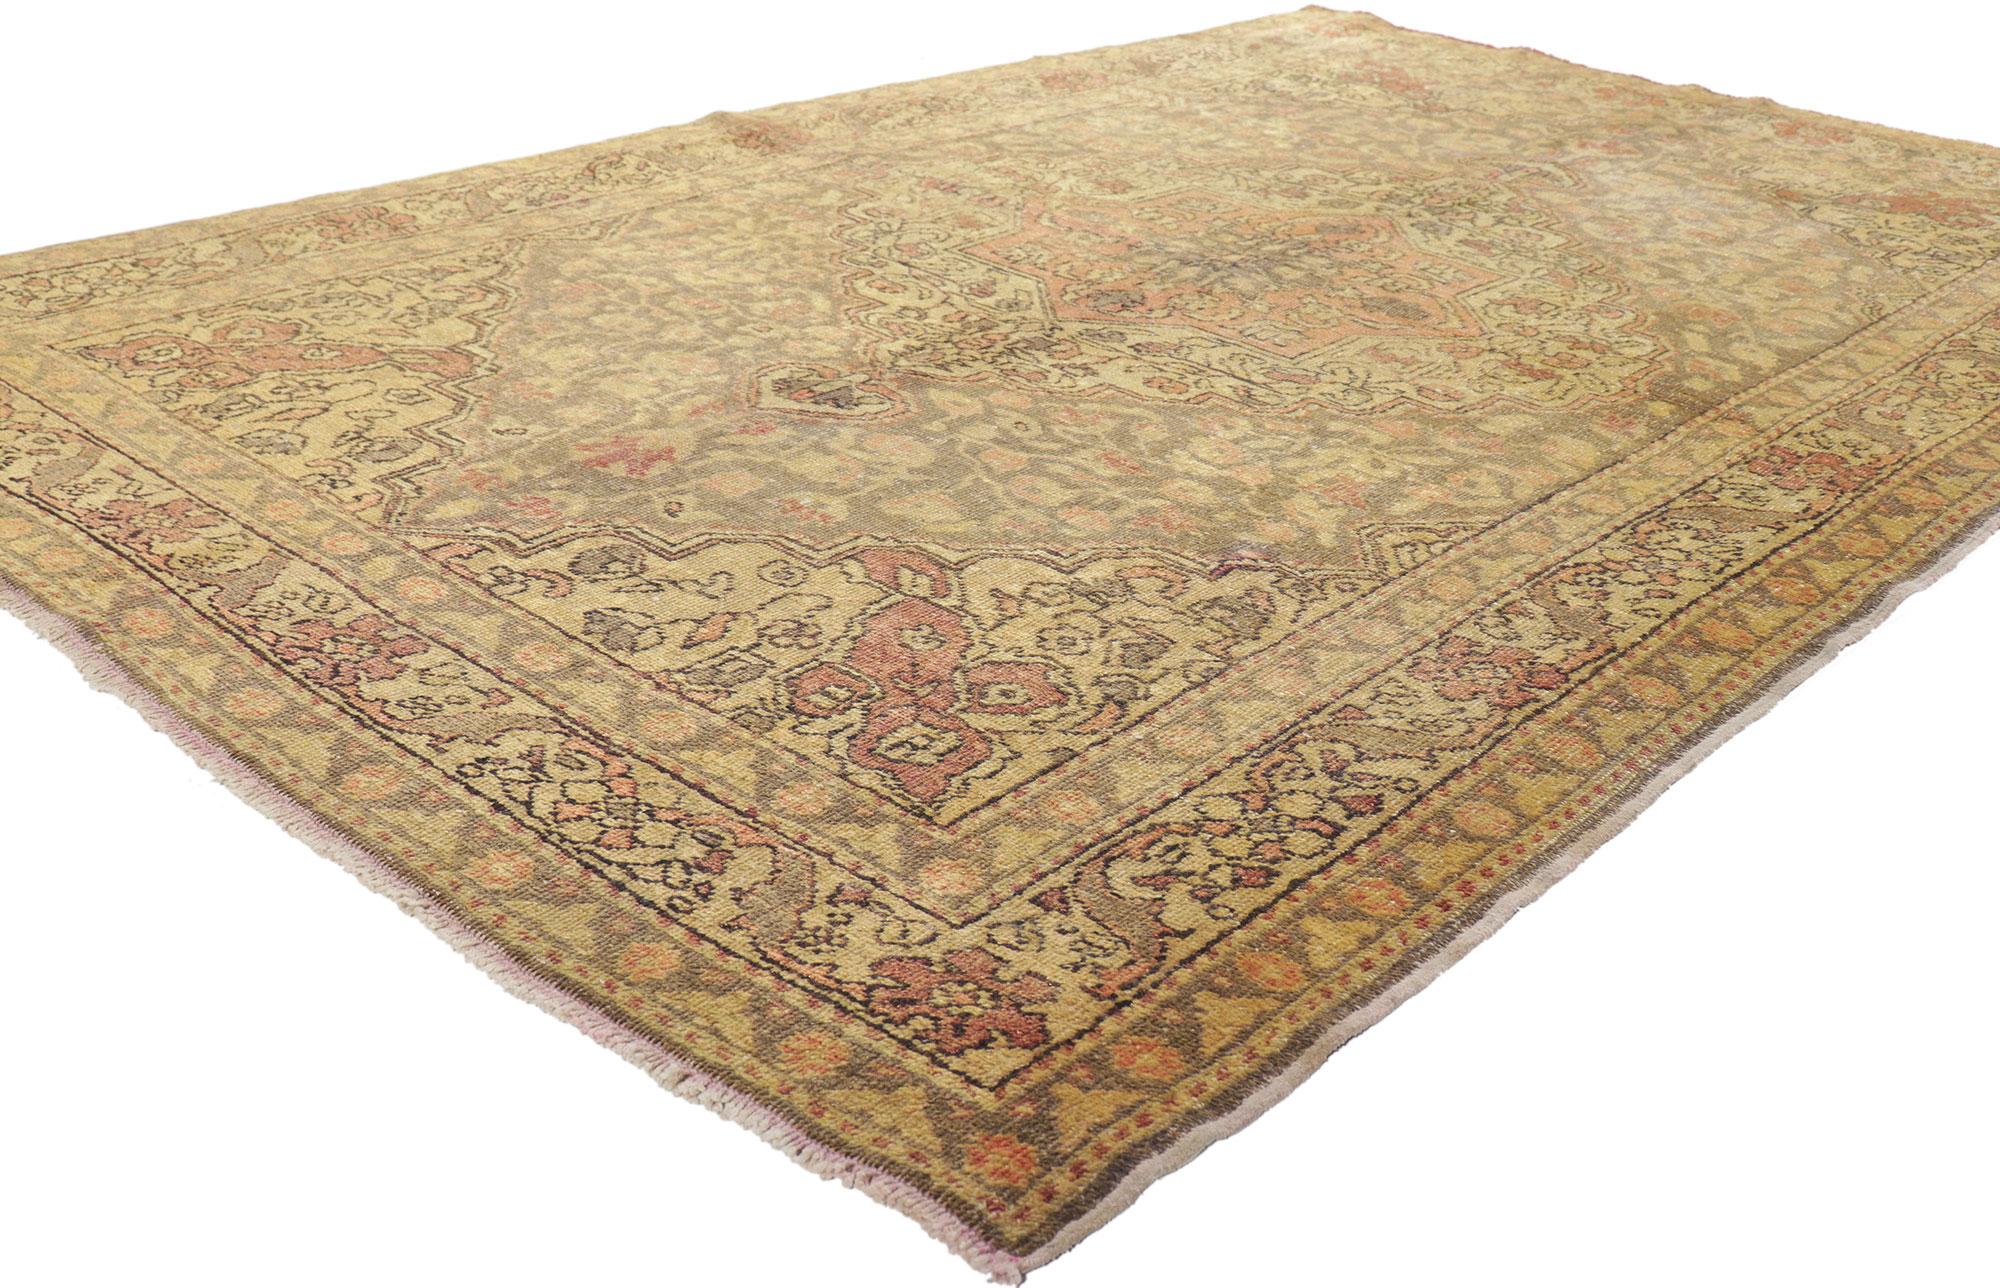 50525 Vintage Turkish Sivas Rug, 04'10 x 07'06.
Rugged beauty meets casual elegance in this hand knotted wool vintage Turkish Sivas rug. The romantic botanical design and warm, dreamy colorway in this piece capture the essence of nostalgic charm and